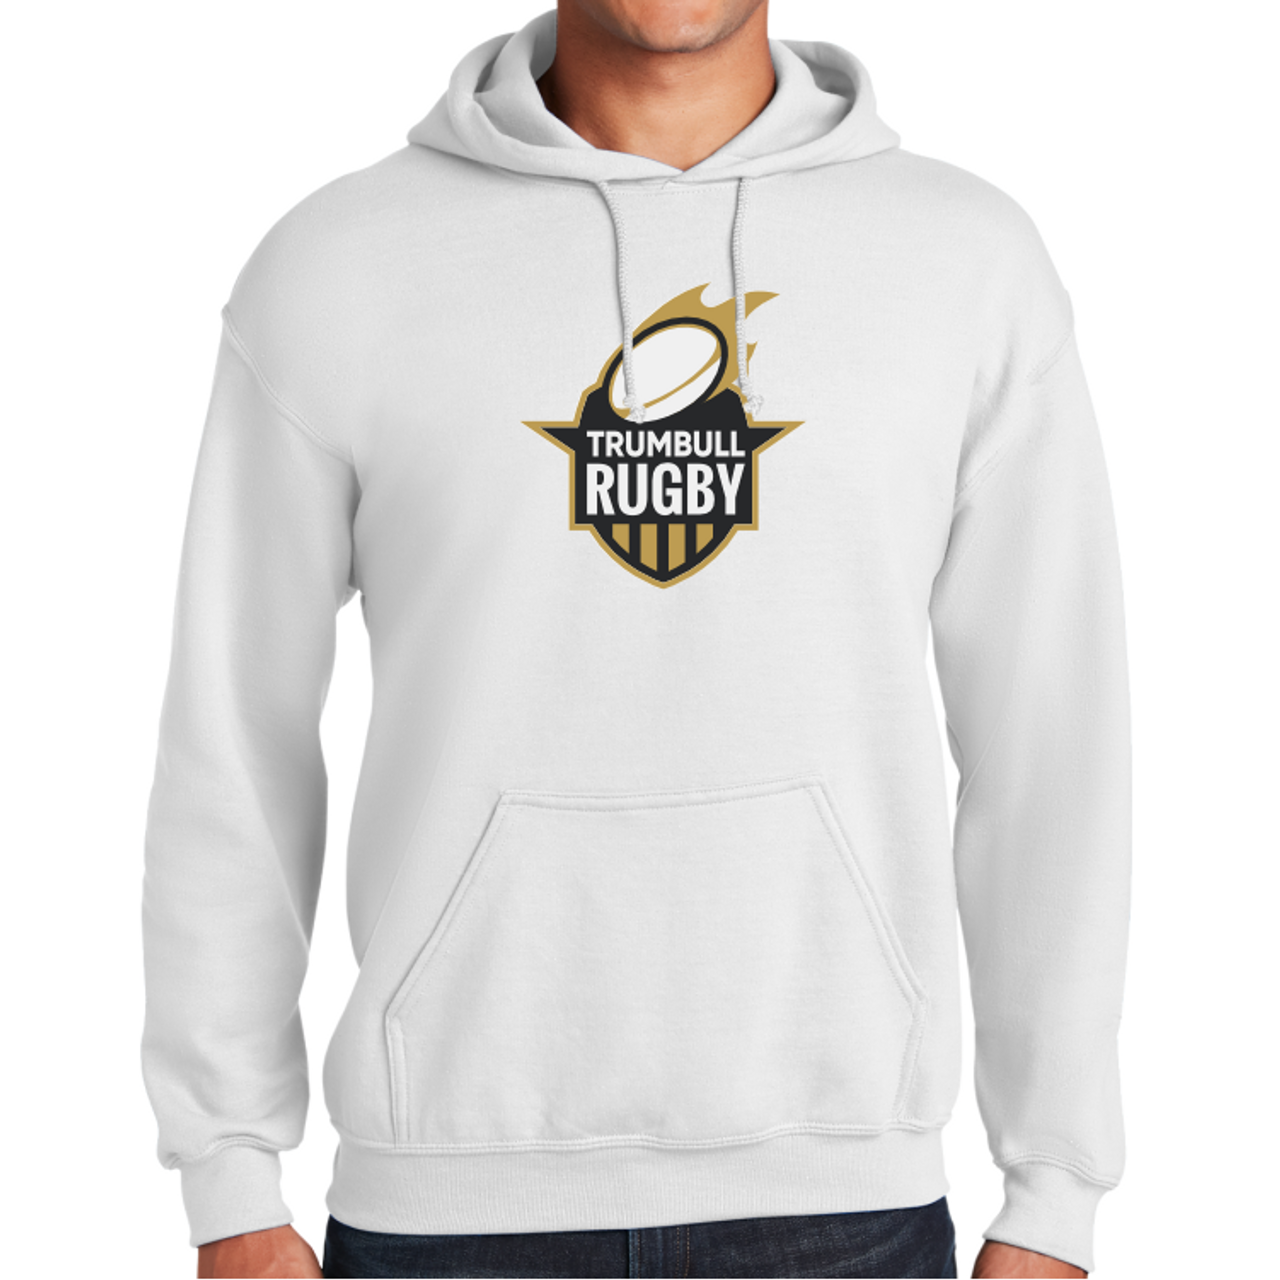 Trumbull Youth Rugby Hoodie, White